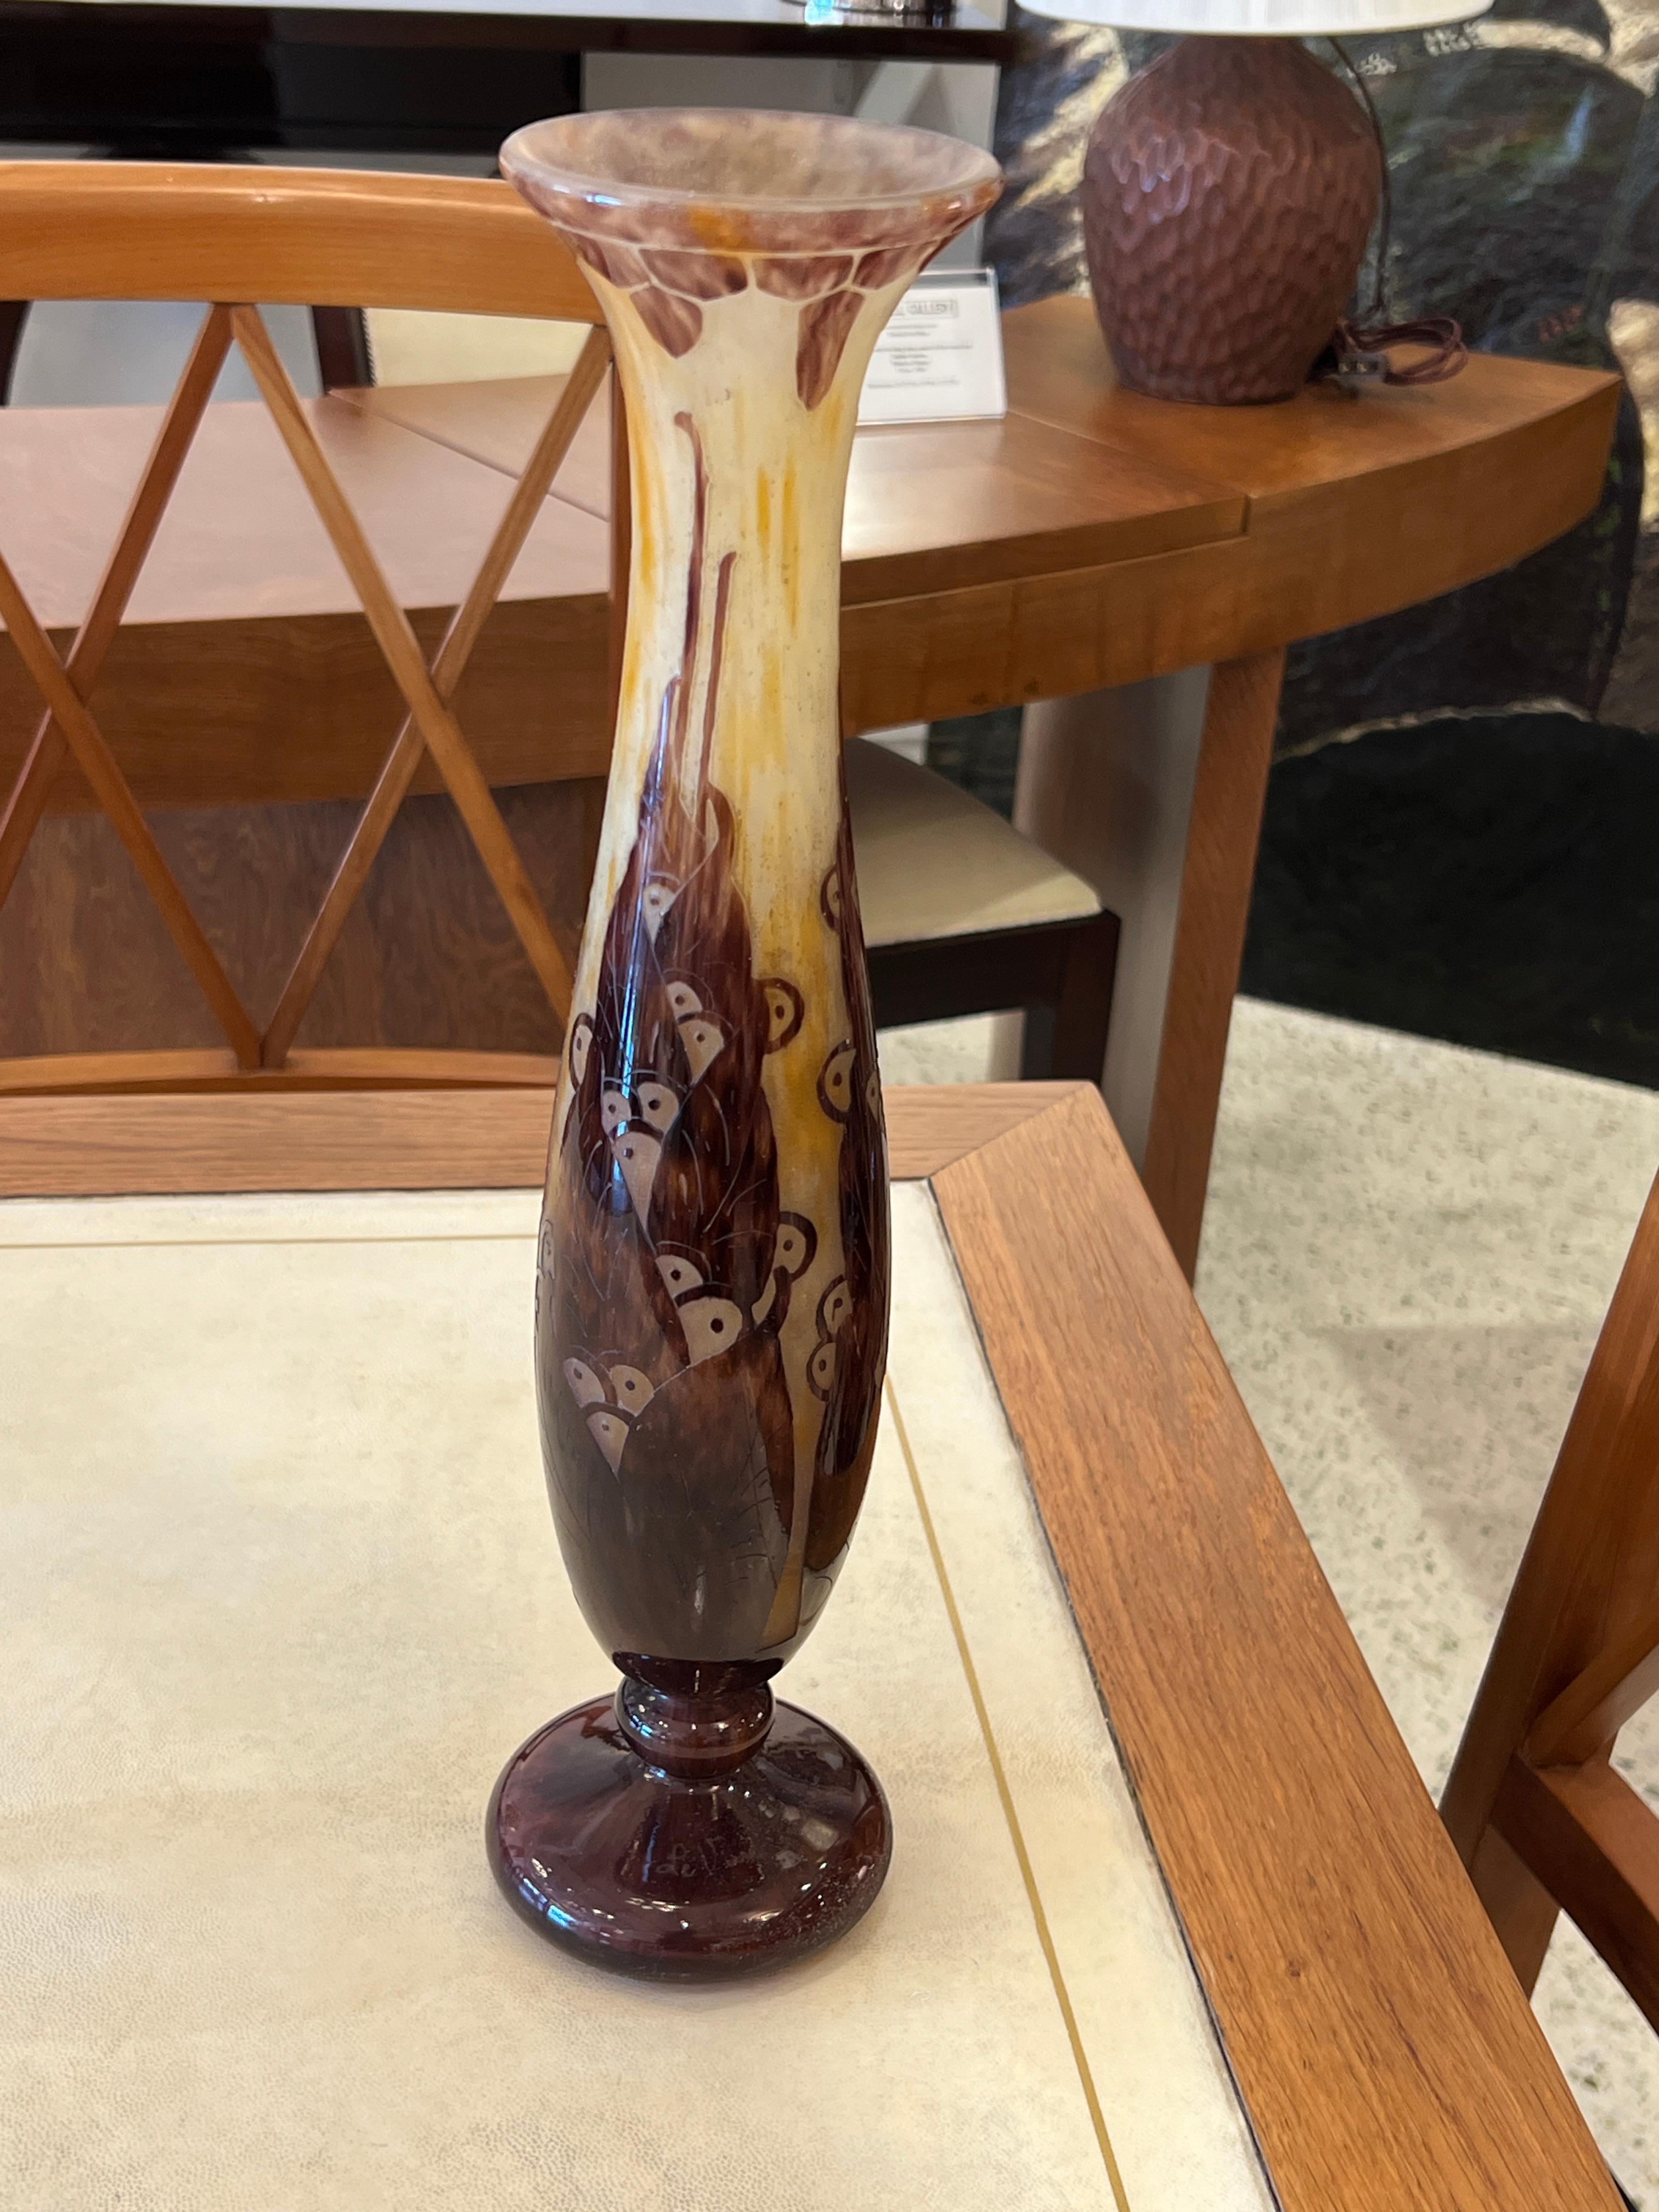 A cylindrical-shaped vase in Mottled Opalescent White, Yellow and Orange glass overlaid with Violet color acid-etched pattern.  The floral pattern is from the Lauriers serie of Le Verre Français. 
Signature: Le Verre Francais.

Charles Schneider was